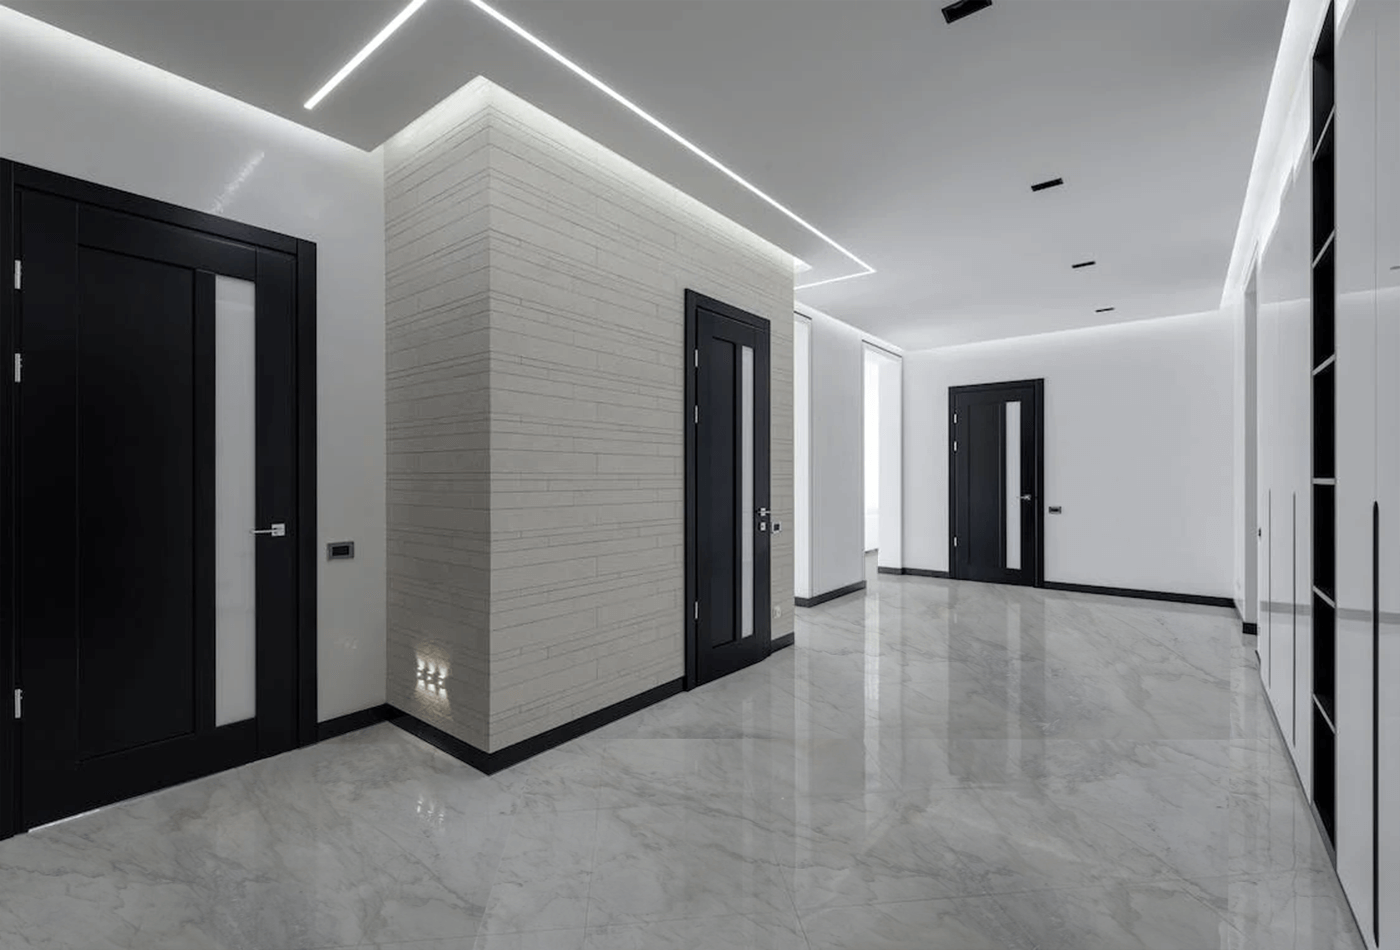 Office Interior Wandering Calacatta Marble to Earn Competency